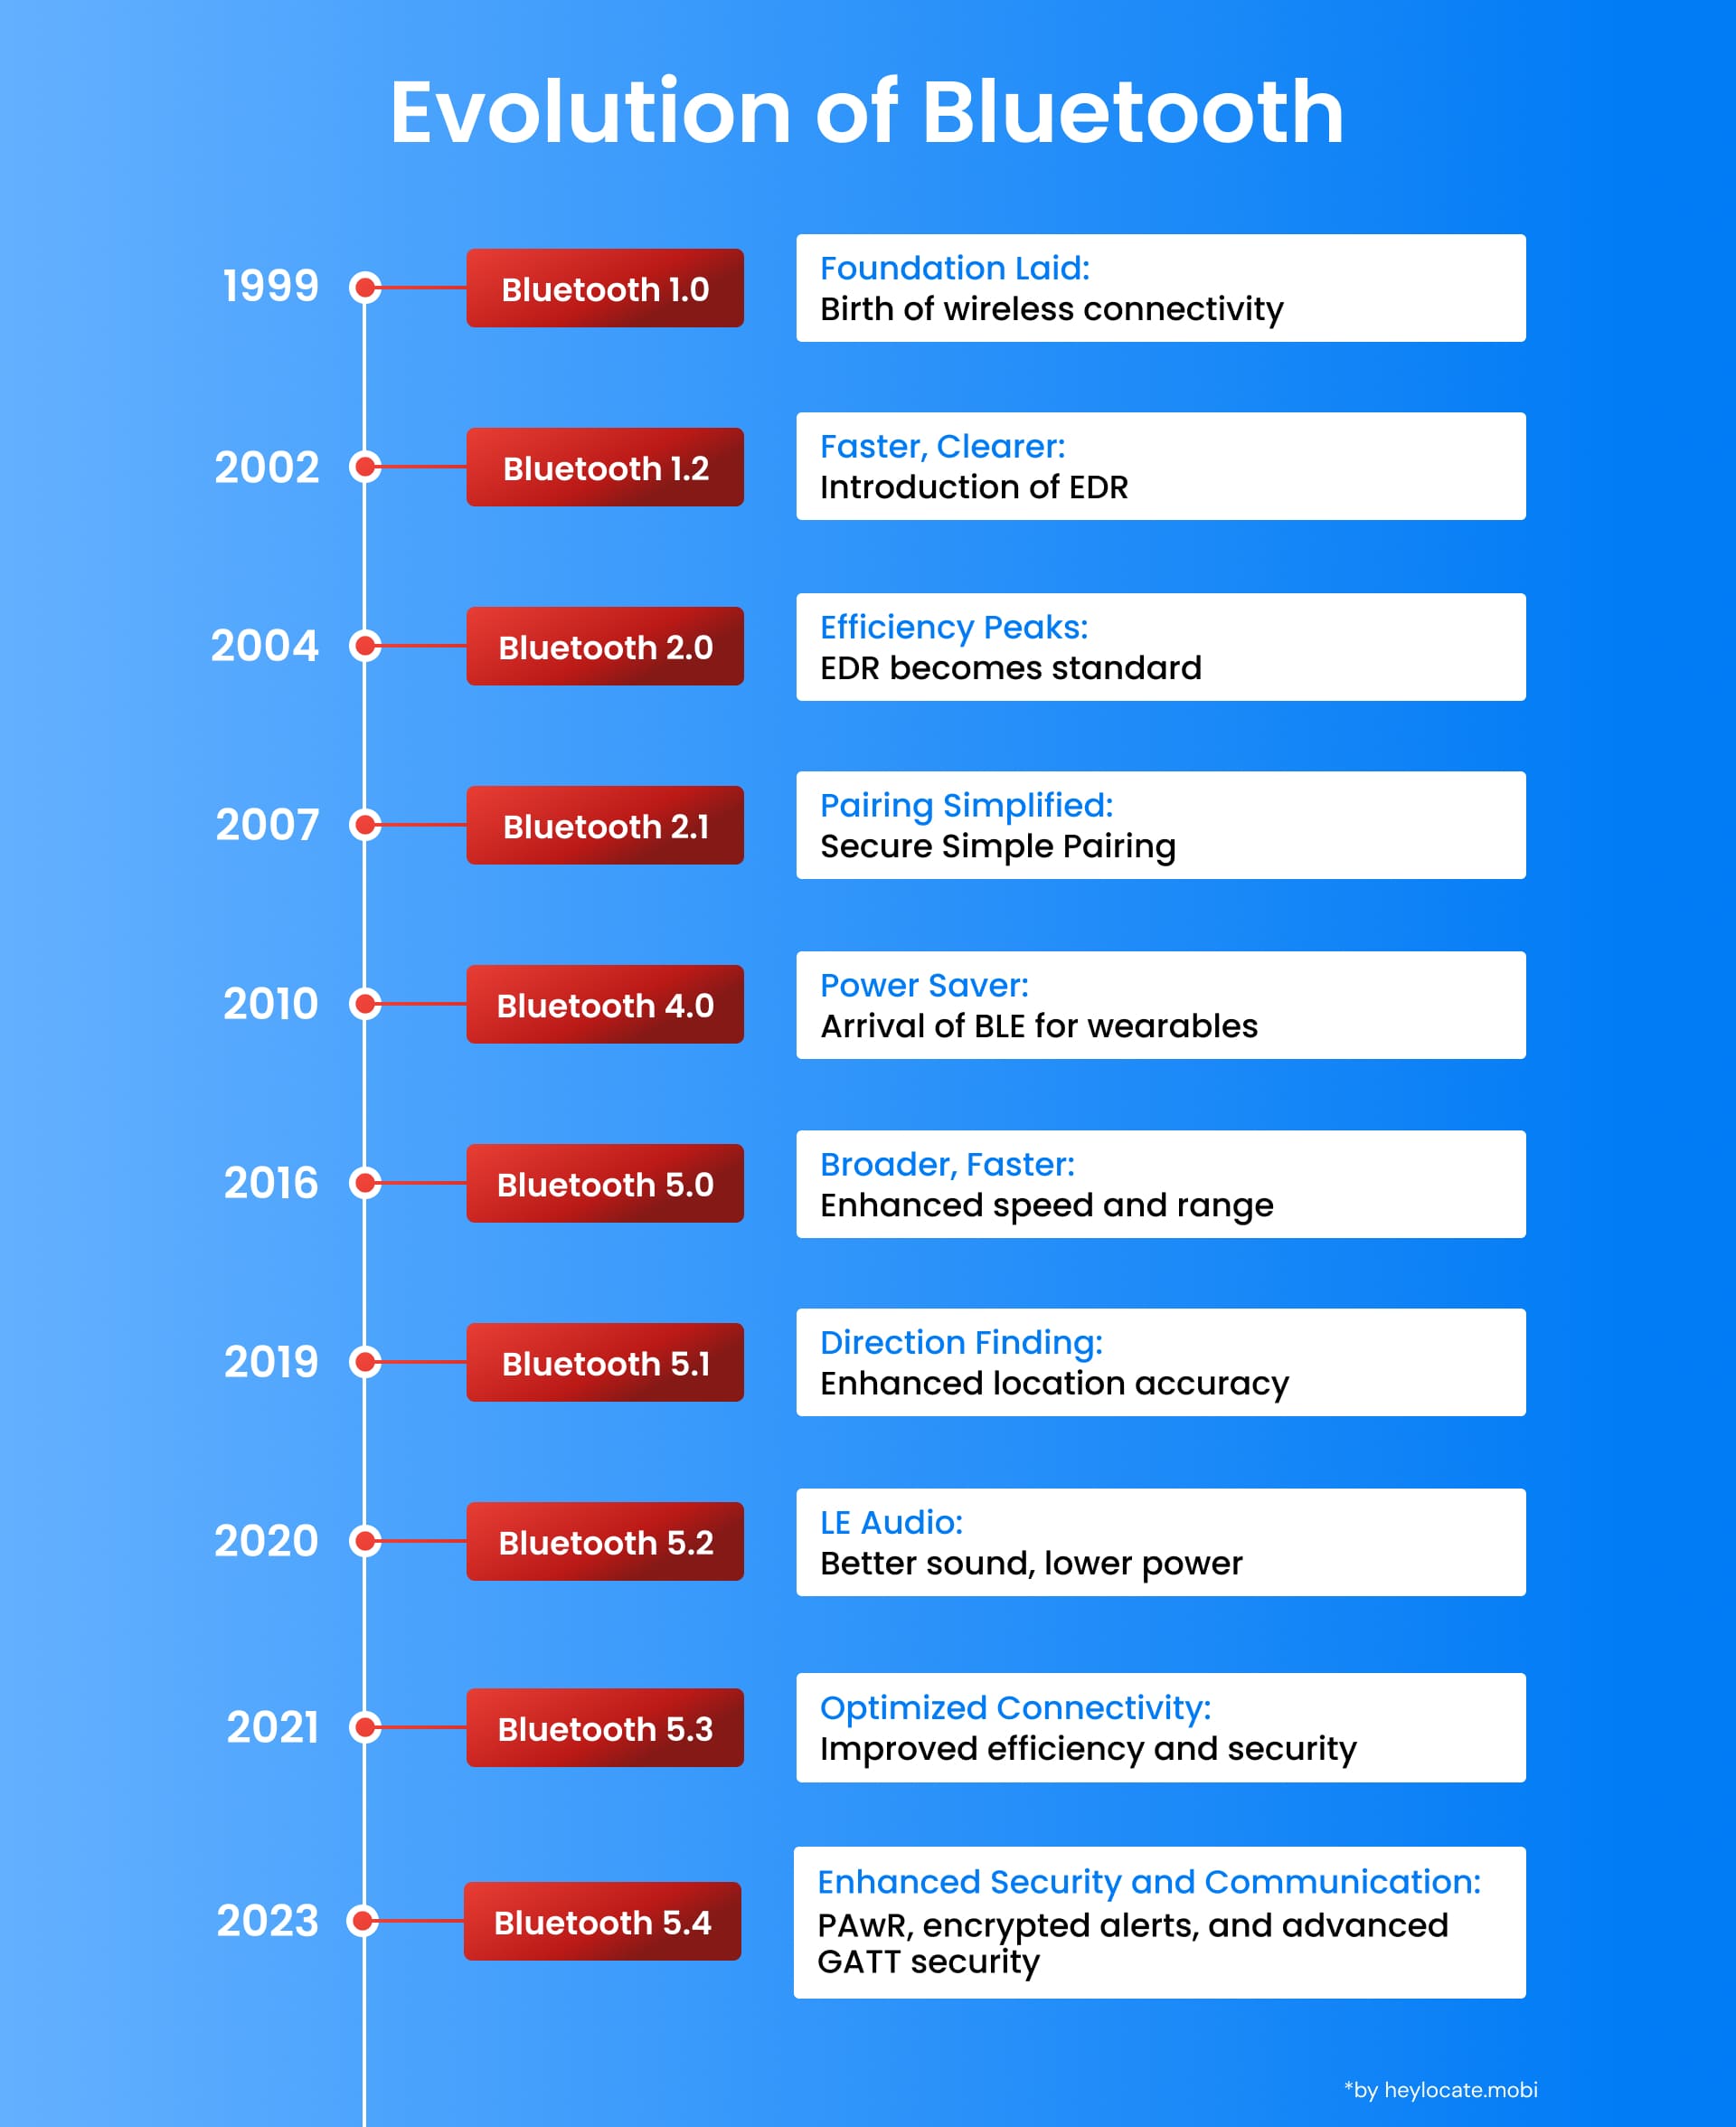 A timeline chart showing the evolution of Bluetooth from version 1.0 in 1999 to version 5.4 in 2023, detailing the major milestones in the development of the technology